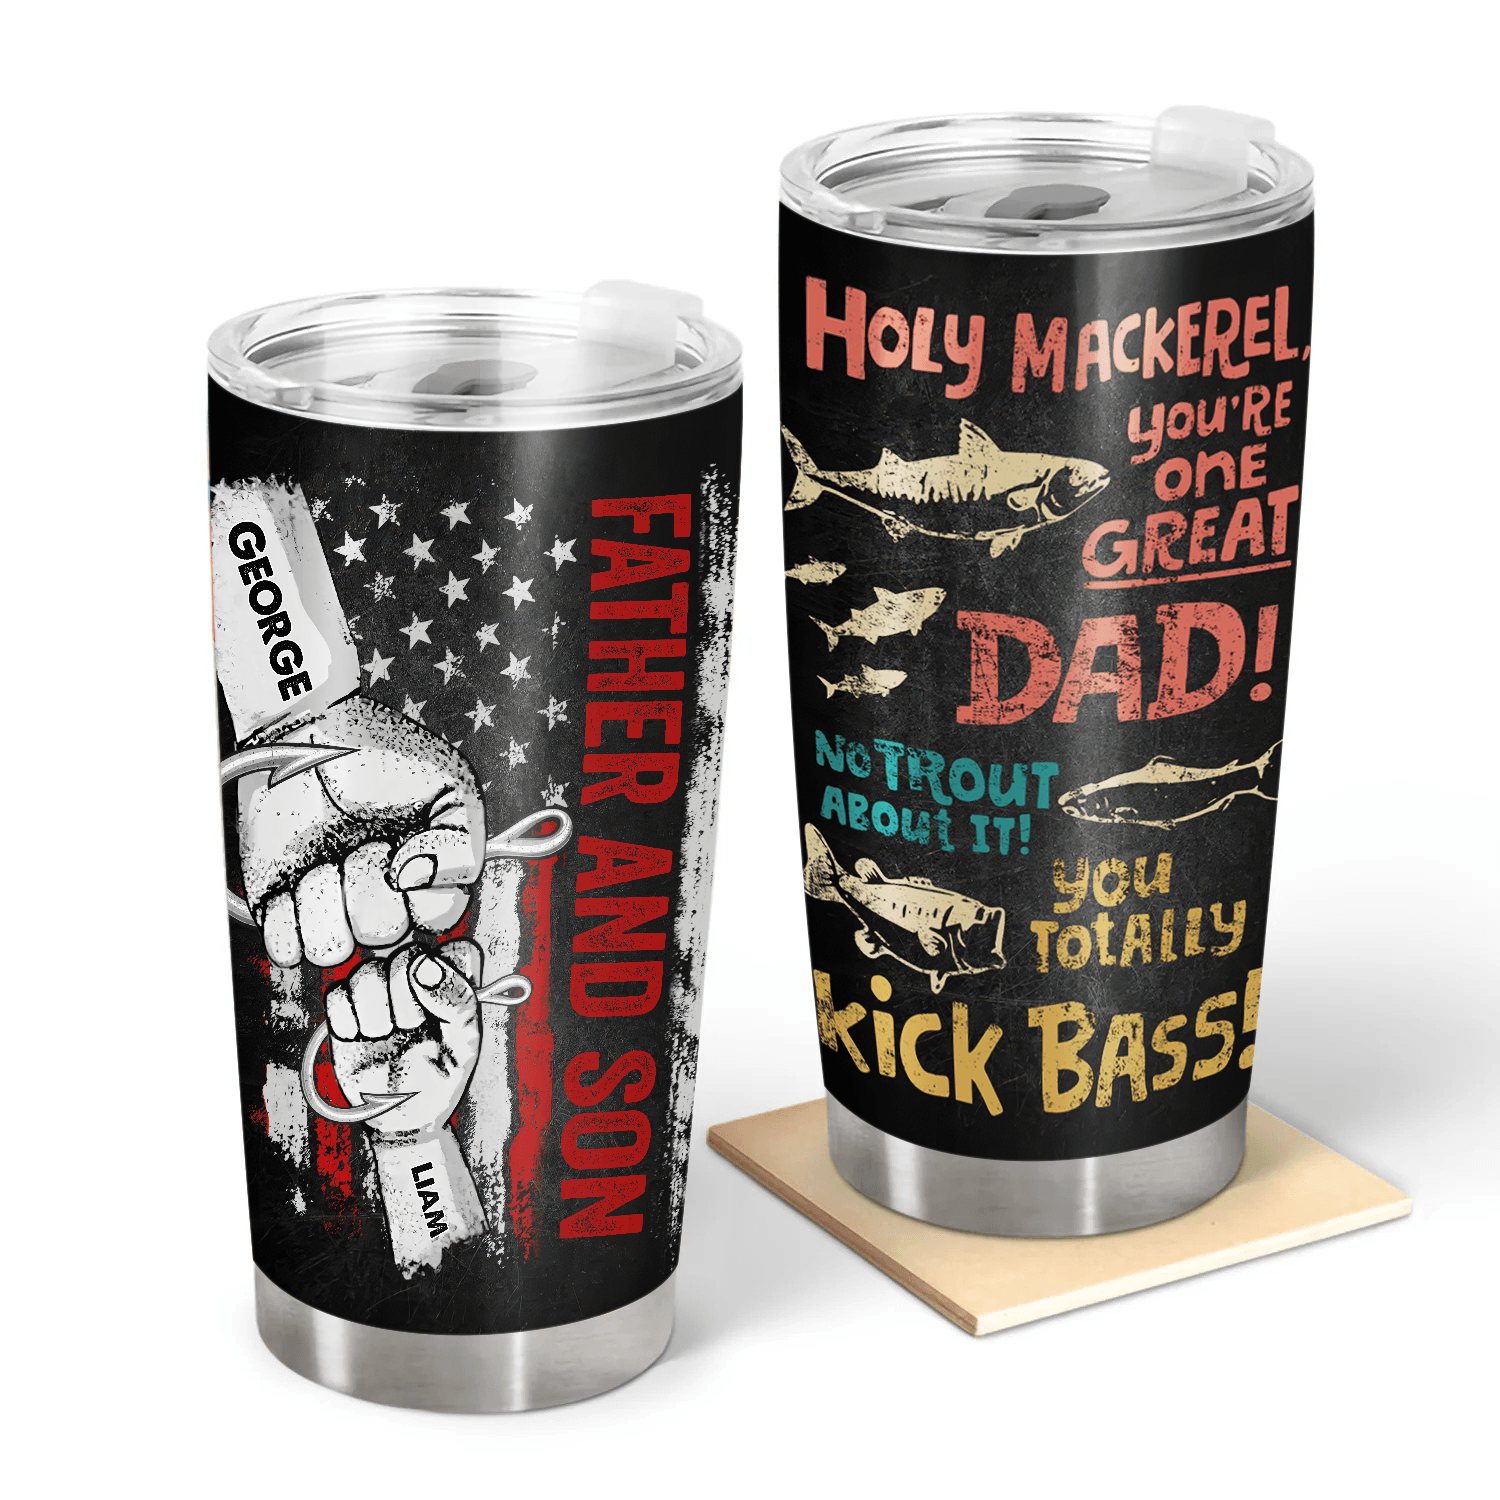 We Hooked The Best Dad Raised Fist Bump - Personalized Custom 20oz Fat Tumbler Cup - Father's Day Funny Gift for Dad, Grandpa, Daddy, Dada, Husband, Fishing, Reel Cool Dad